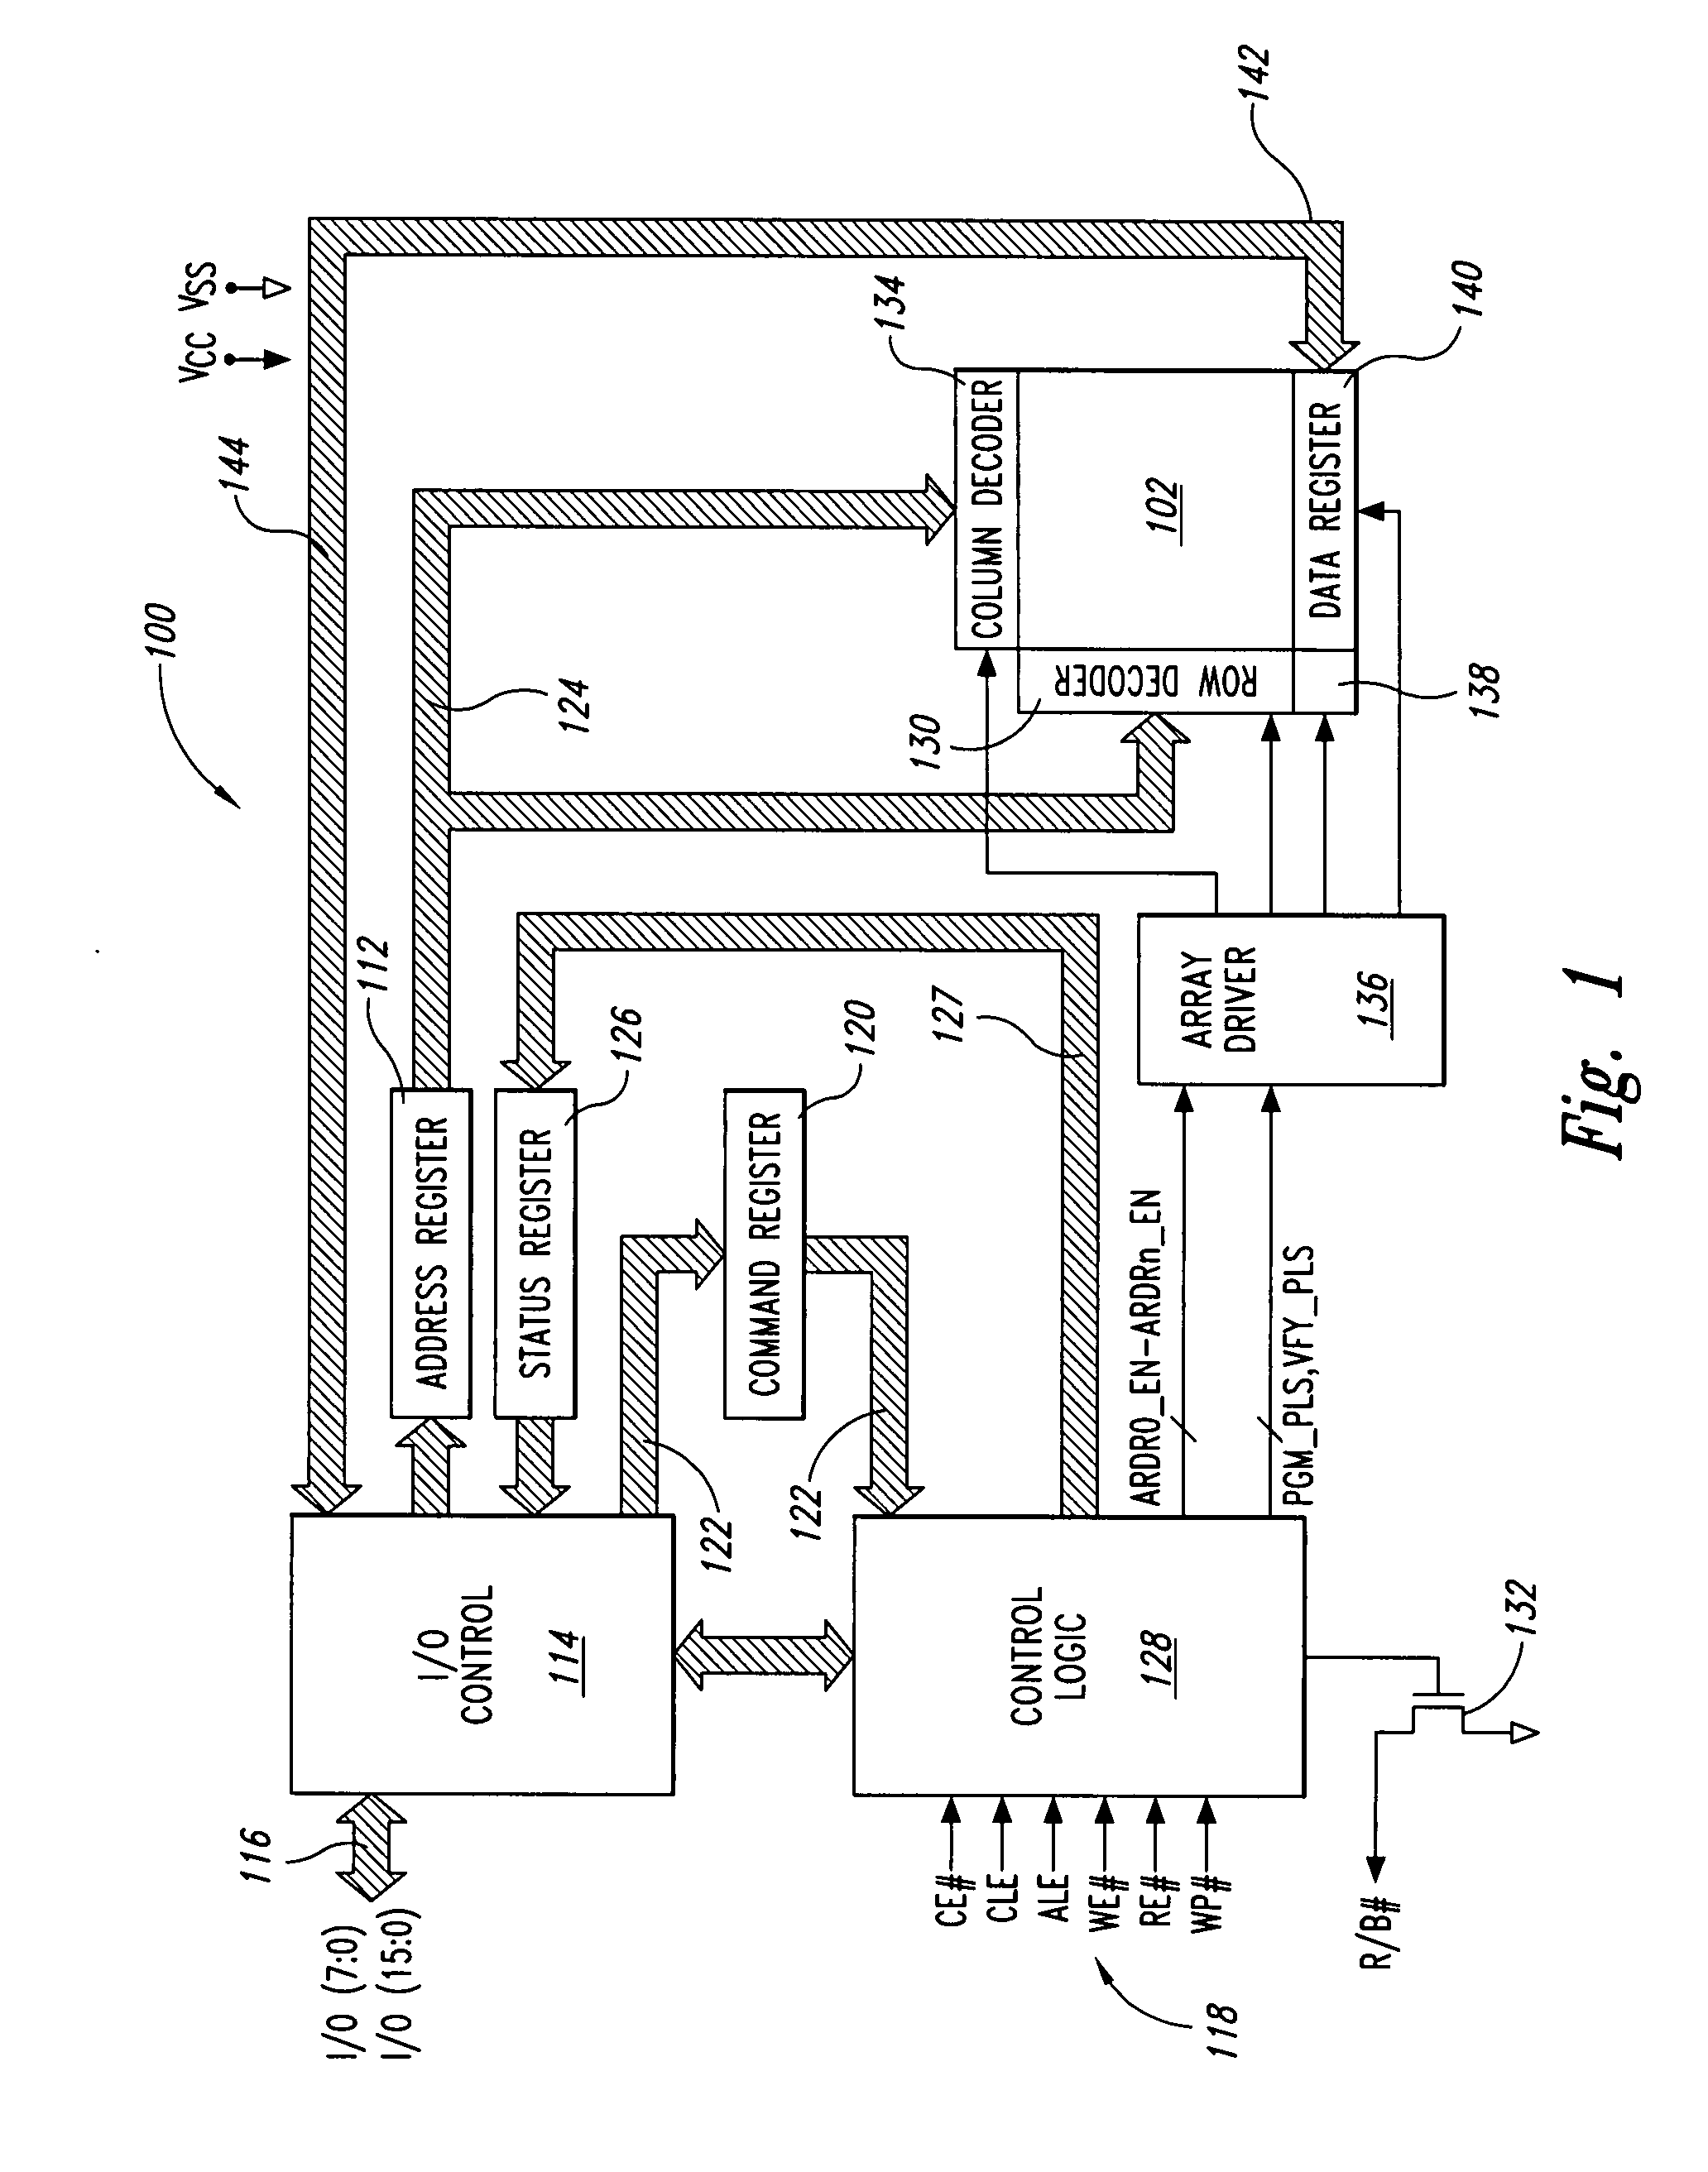 System and memory for sequential multi-plane page memory operations